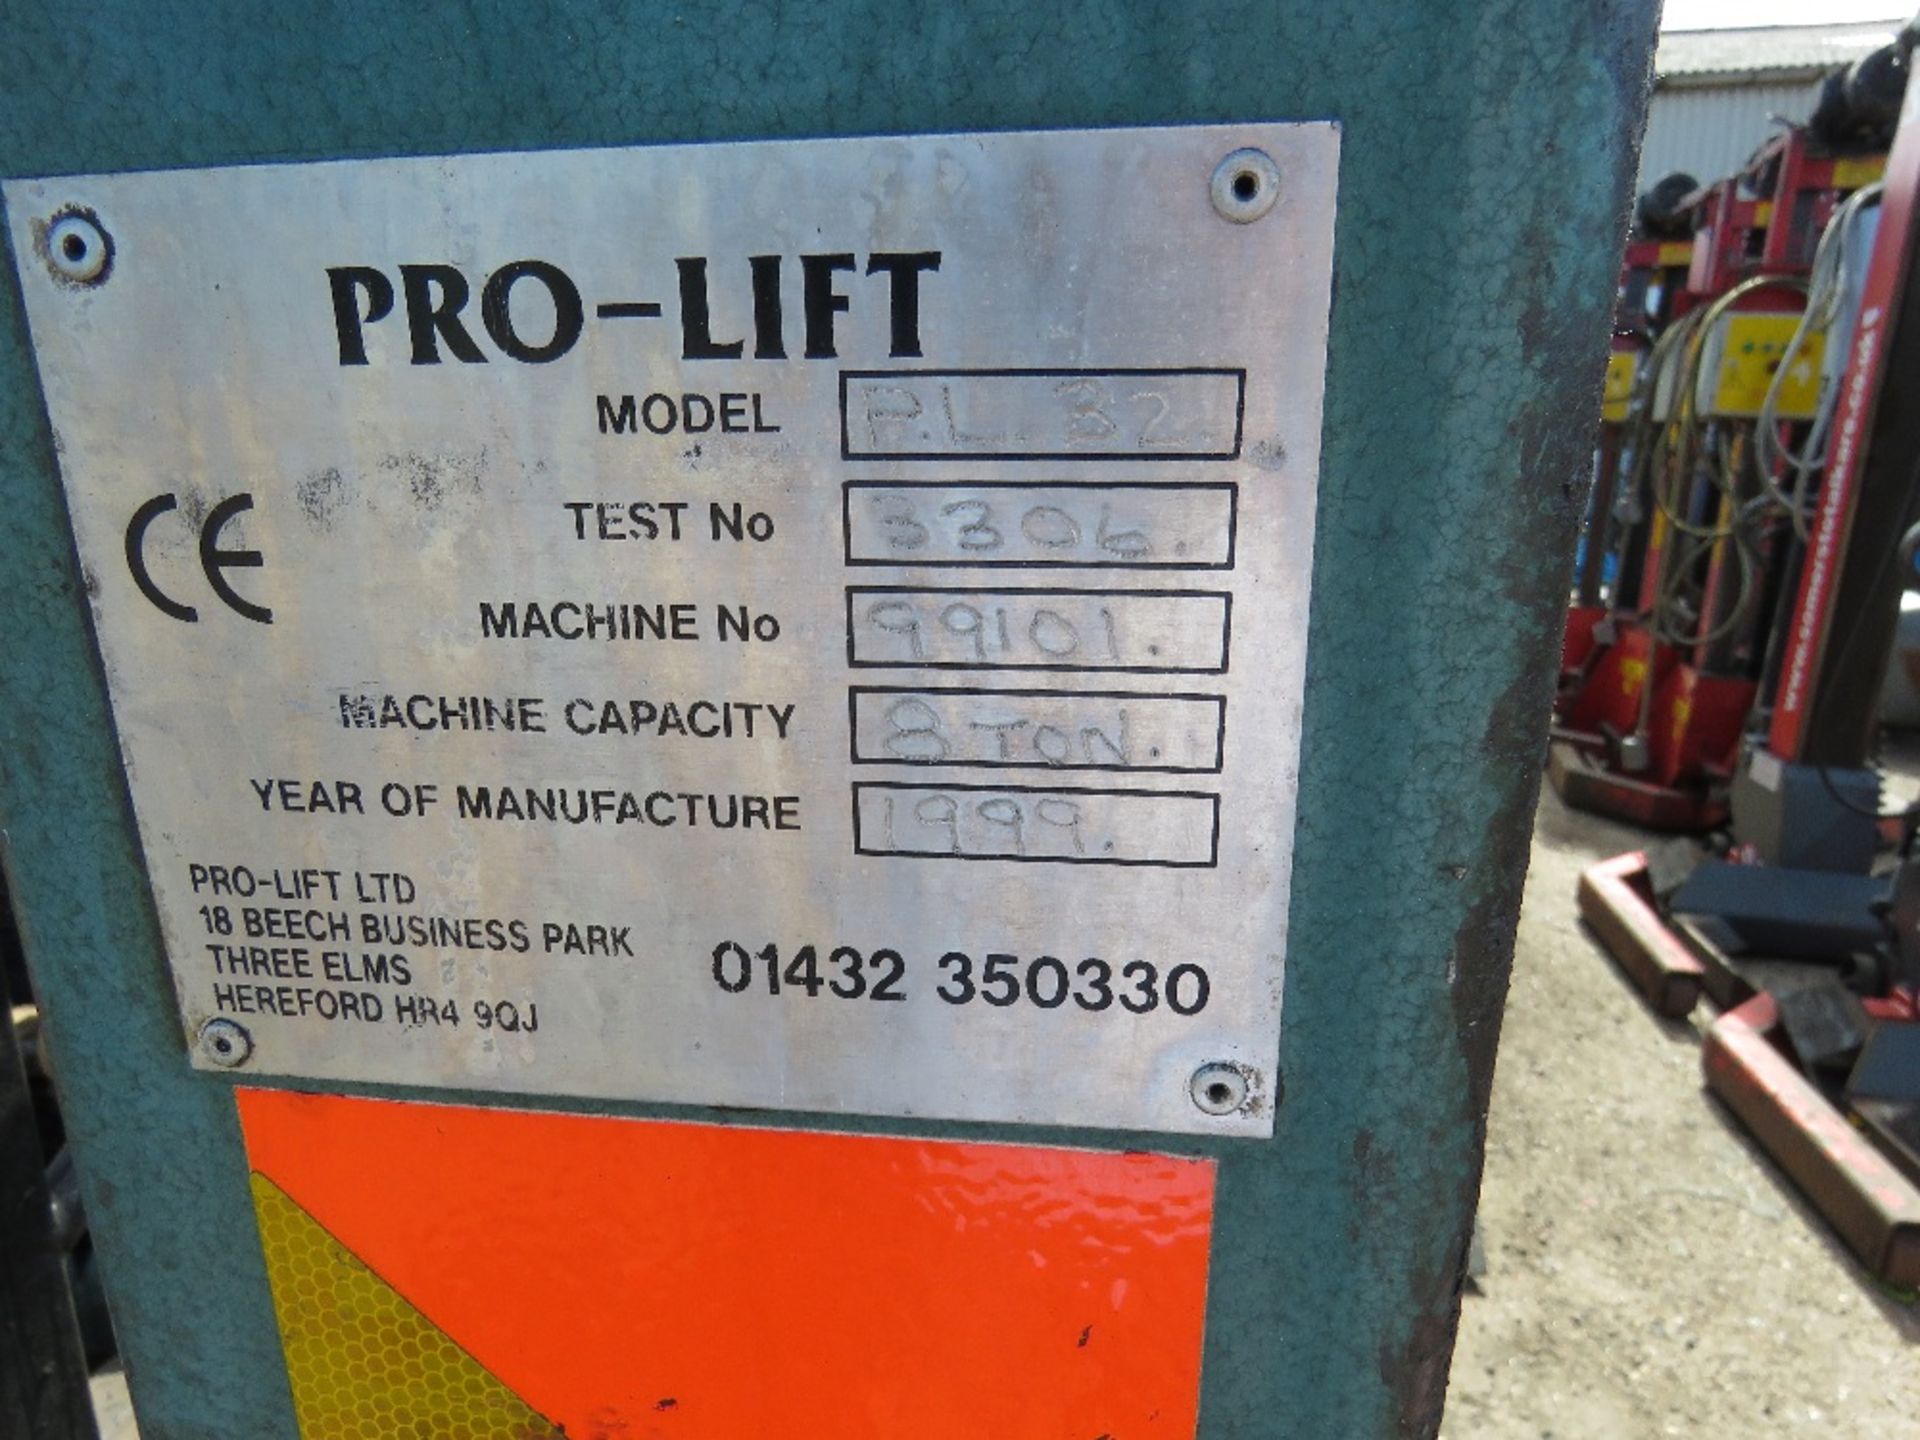 SET OF 4 X PROLIFT PL32 PORTABLE COLUMN LIFT UNITS FOR COMMERCIAL VEHICLES, 8 TONNE RATED CAPACITY, - Image 2 of 4